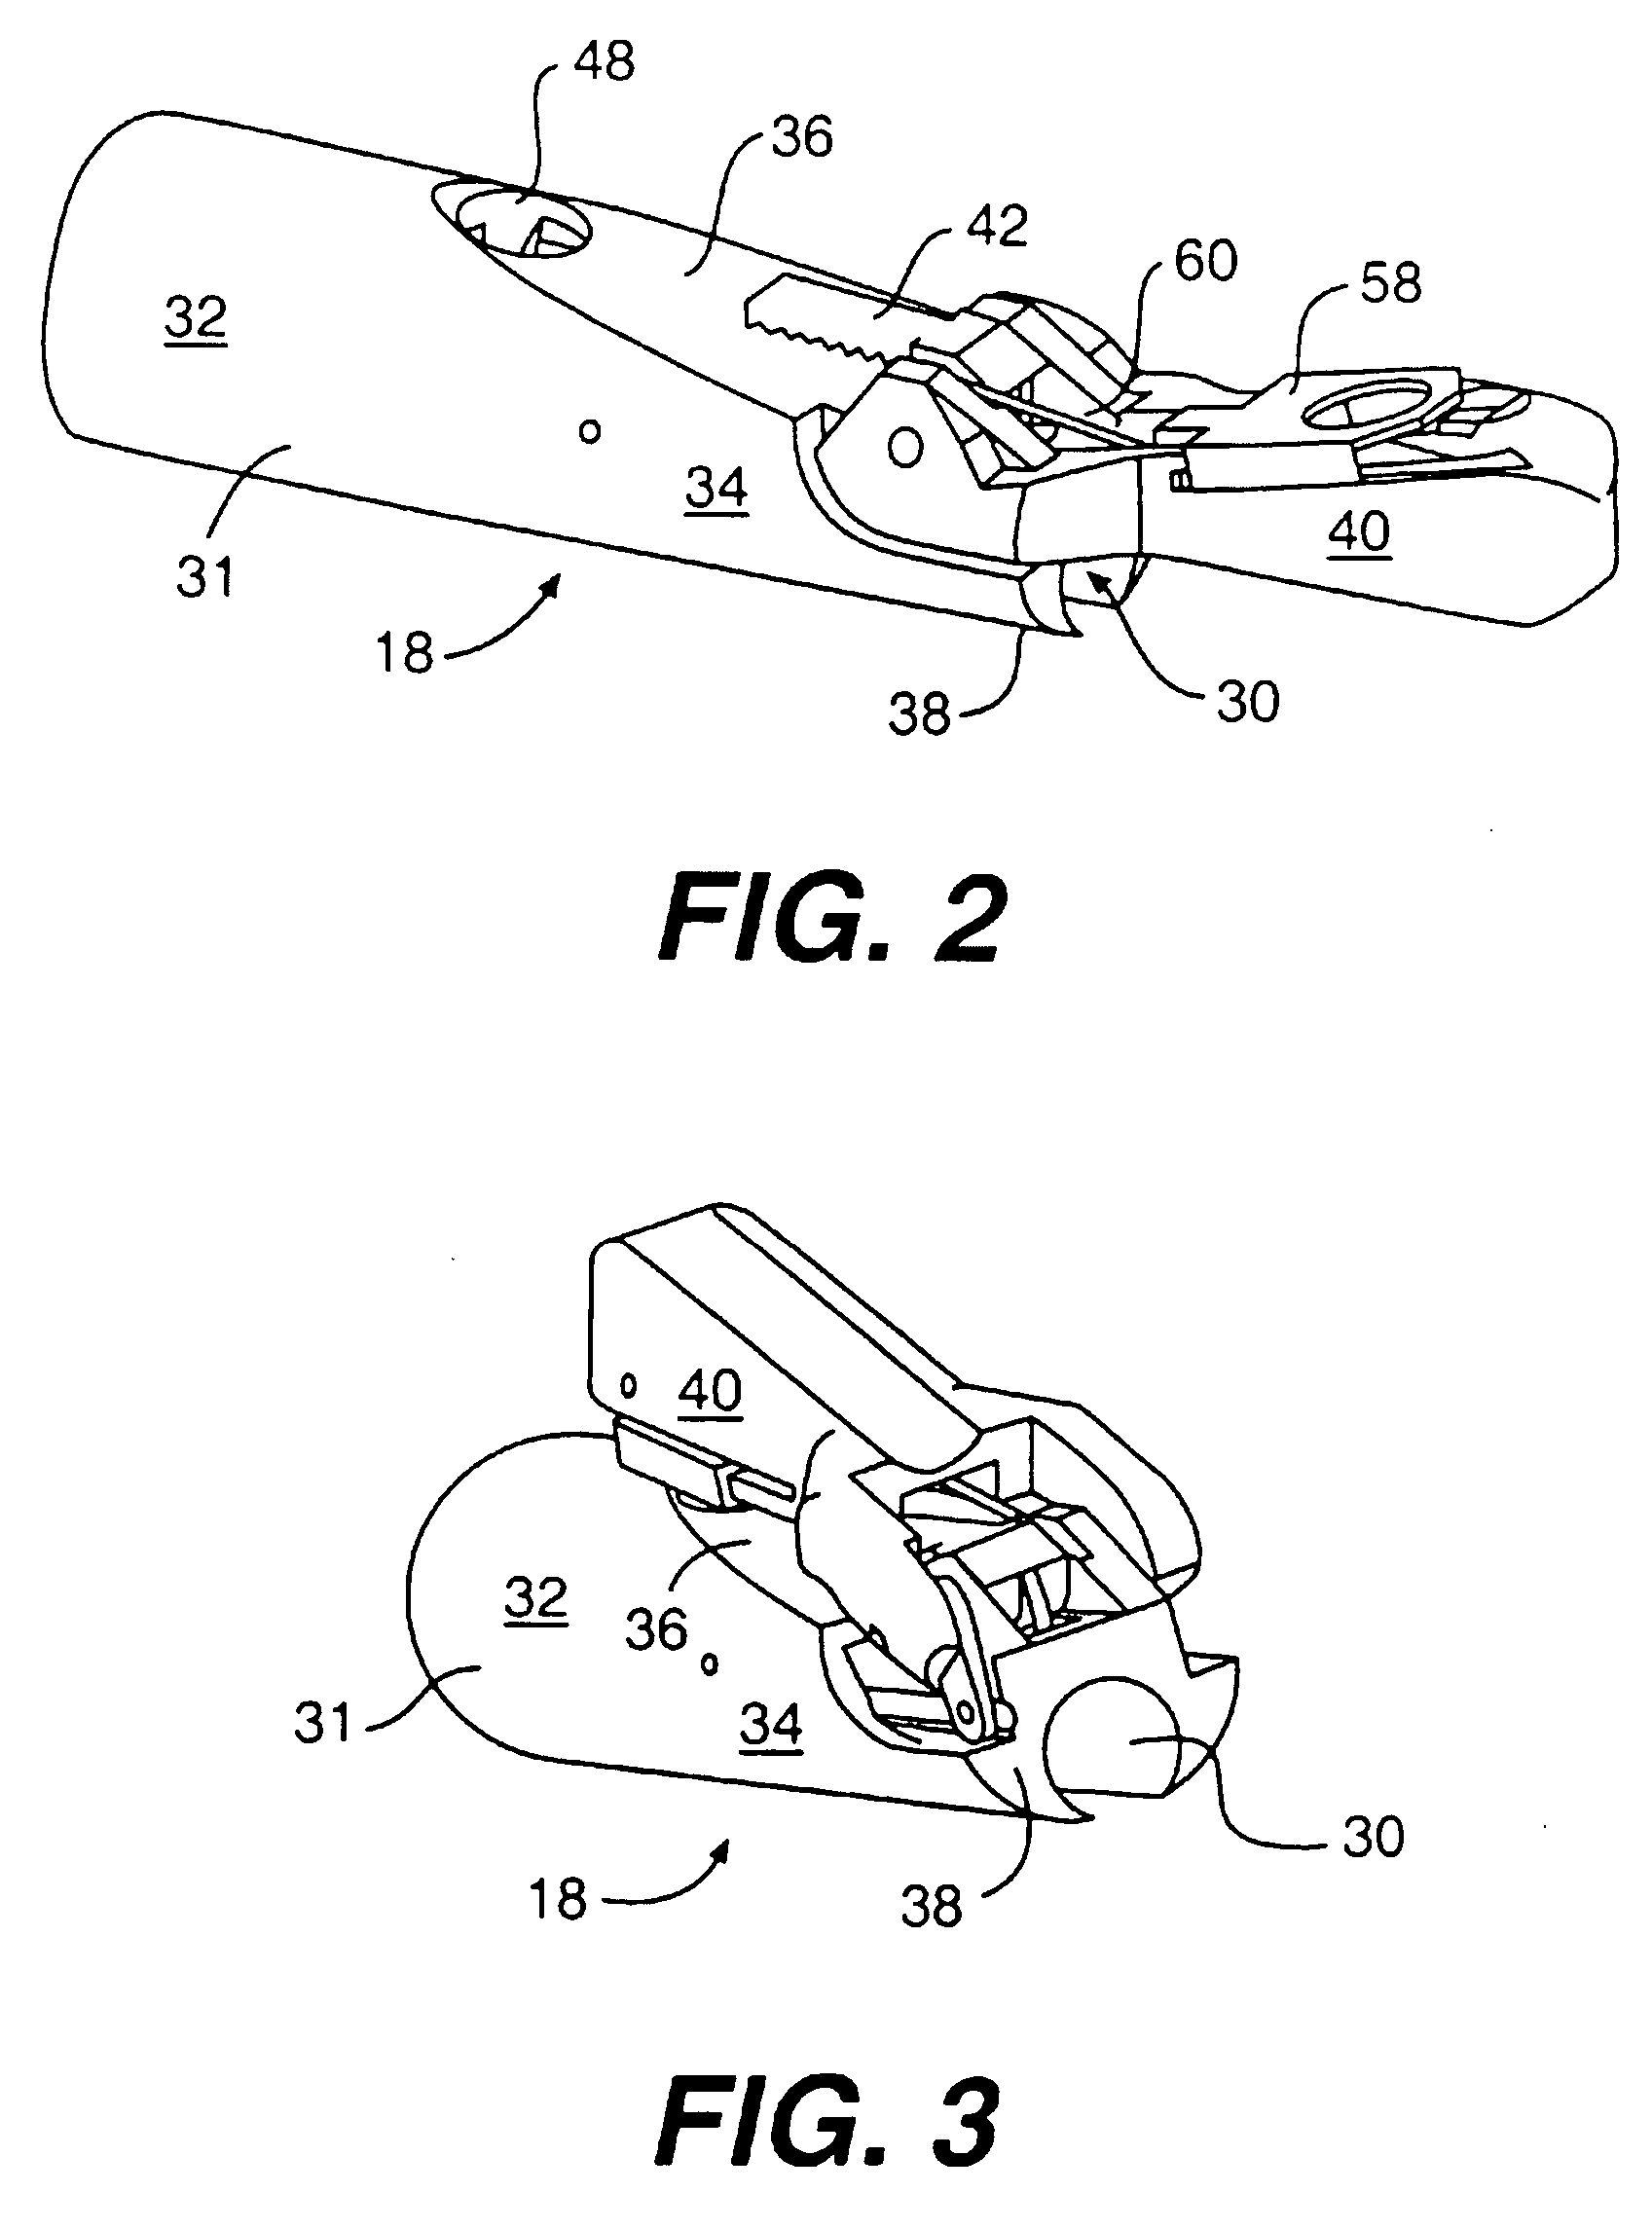 Surgical instrument for invagination and fundoplication